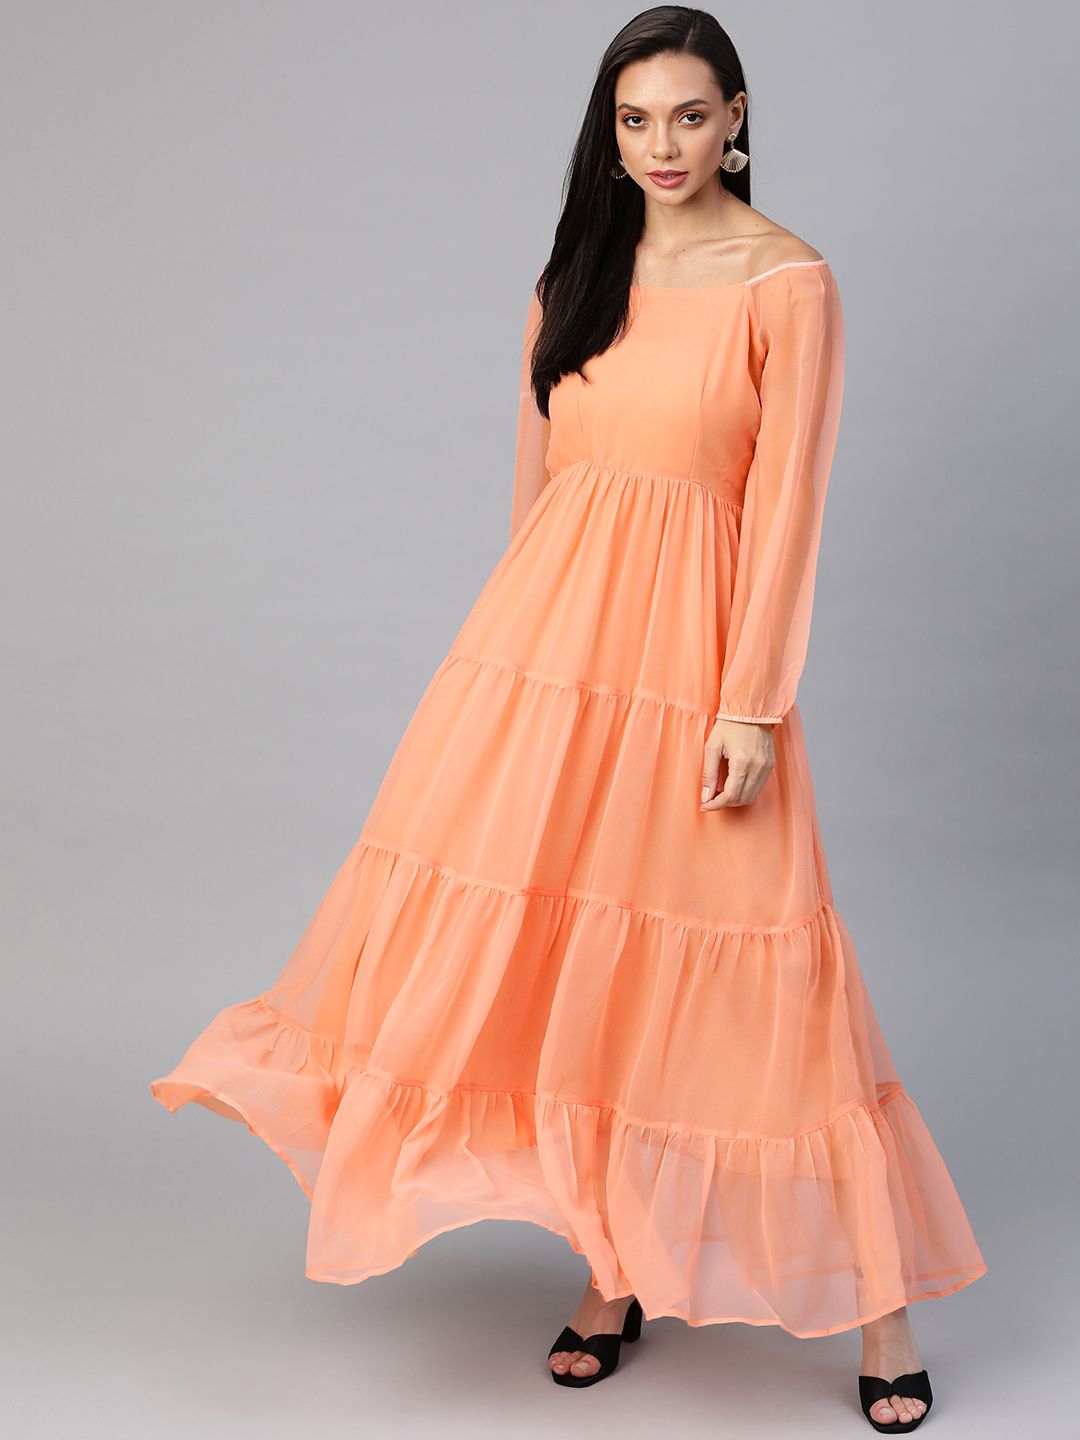 Cottinfab Peach-Coloured Off-Shoulder Tiered Maxi Dress Price in India